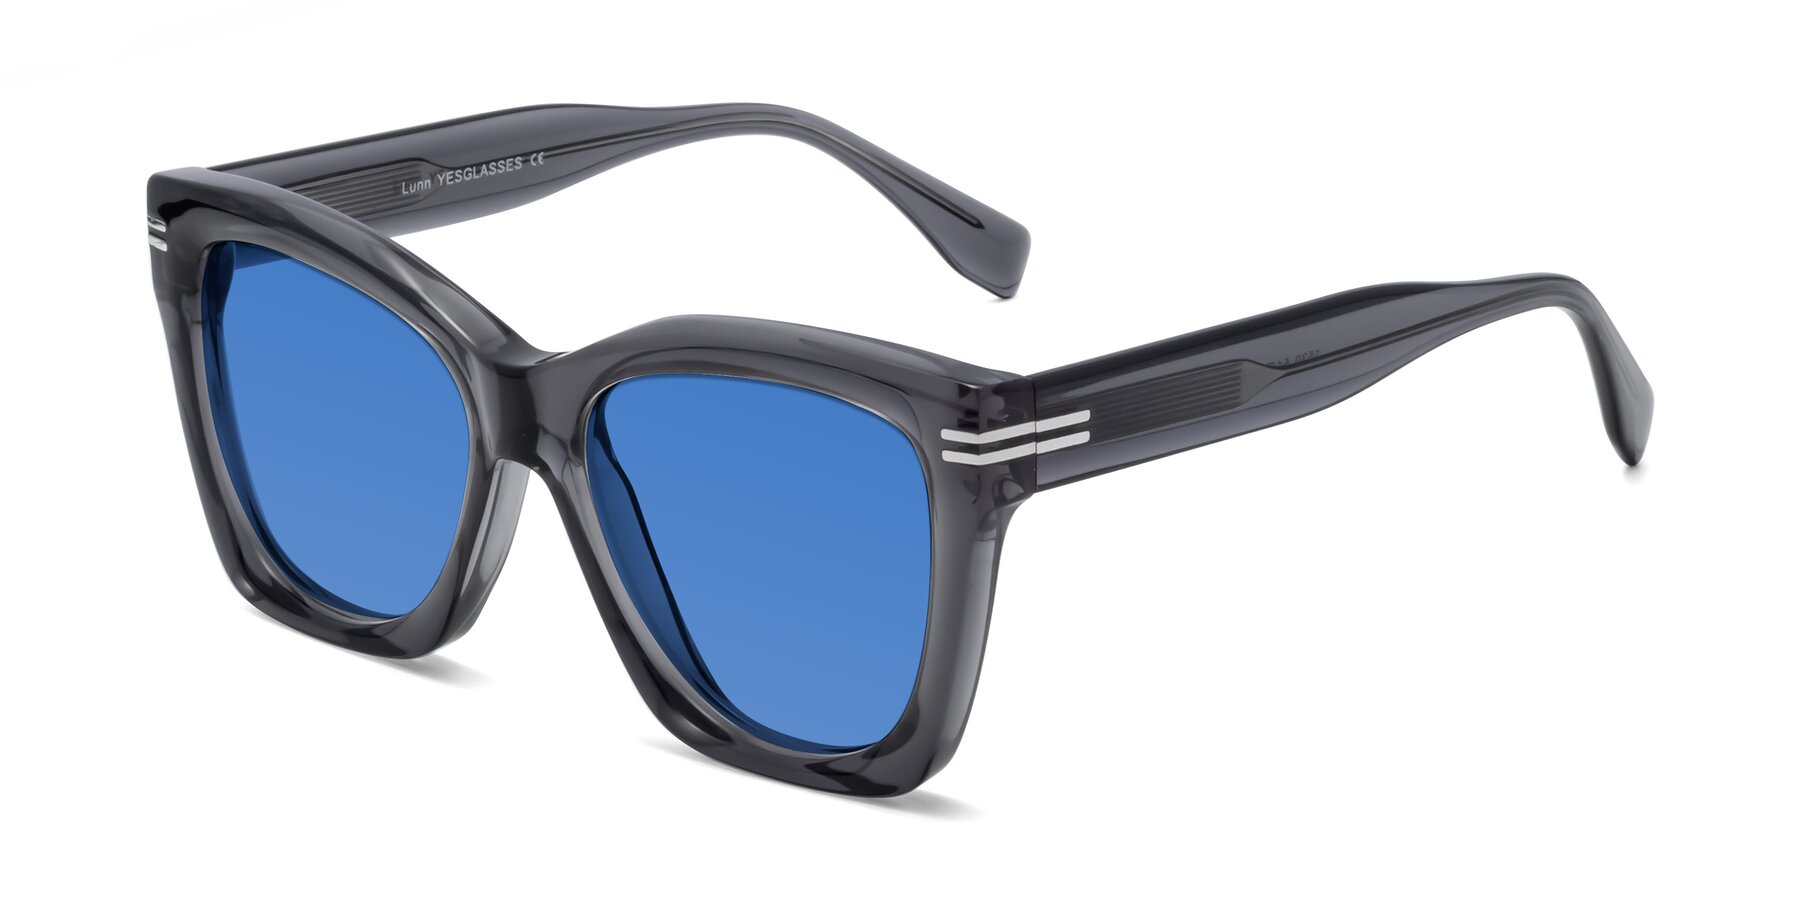 Angle of Lunn in Translucent Gray with Blue Tinted Lenses